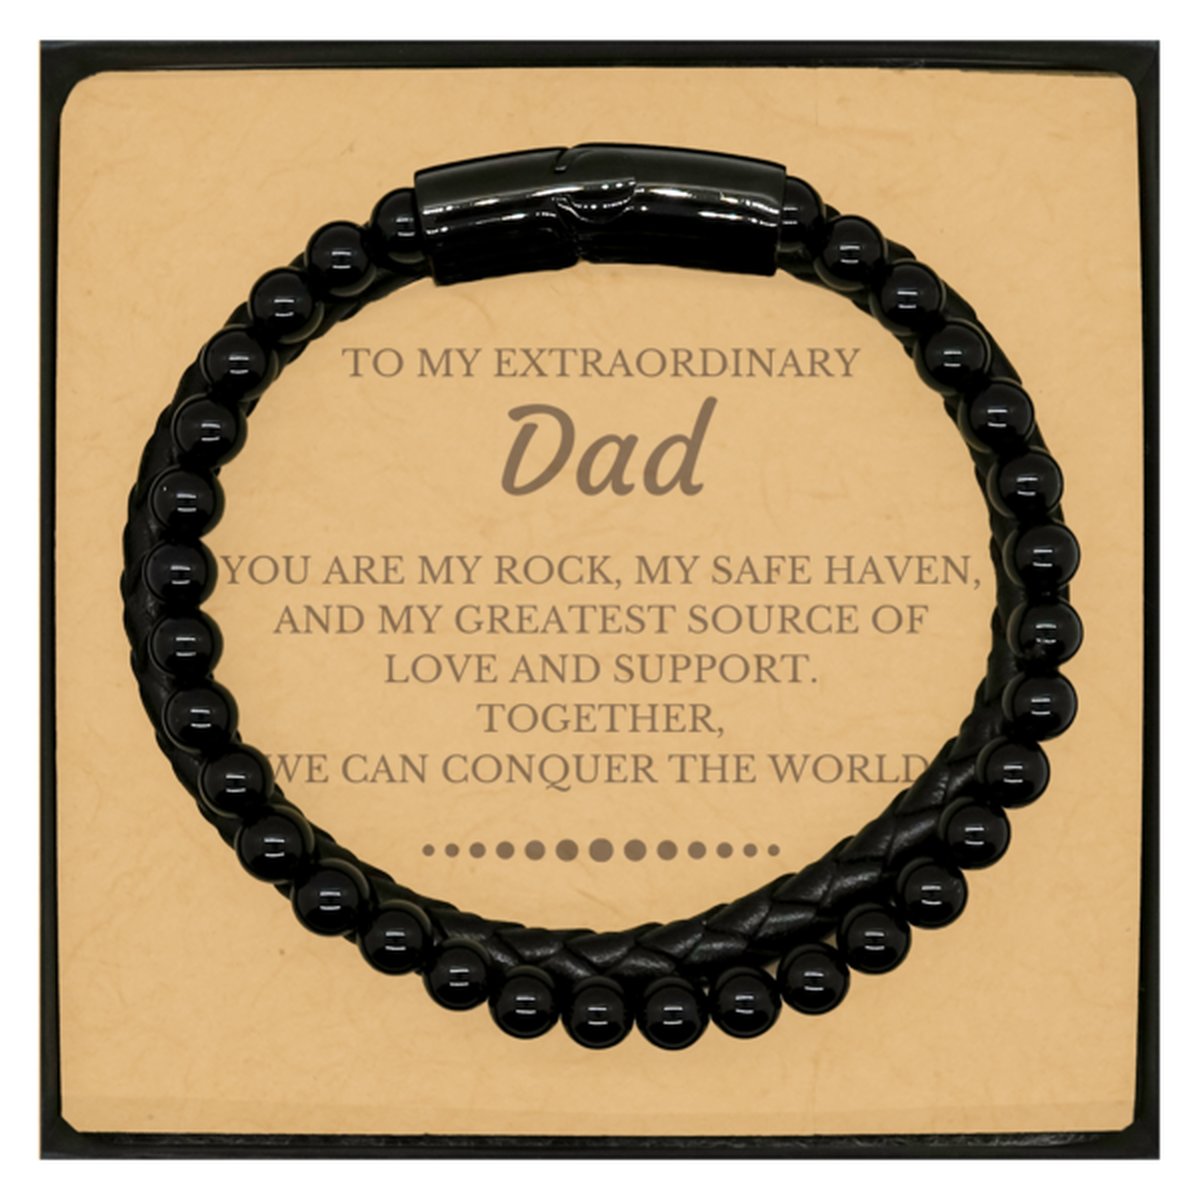 To My Extraordinary Dad Gifts, Together, we can conquer the world, Birthday Christmas Stone Leather Bracelets For Dad, Christmas Gifts For Dad